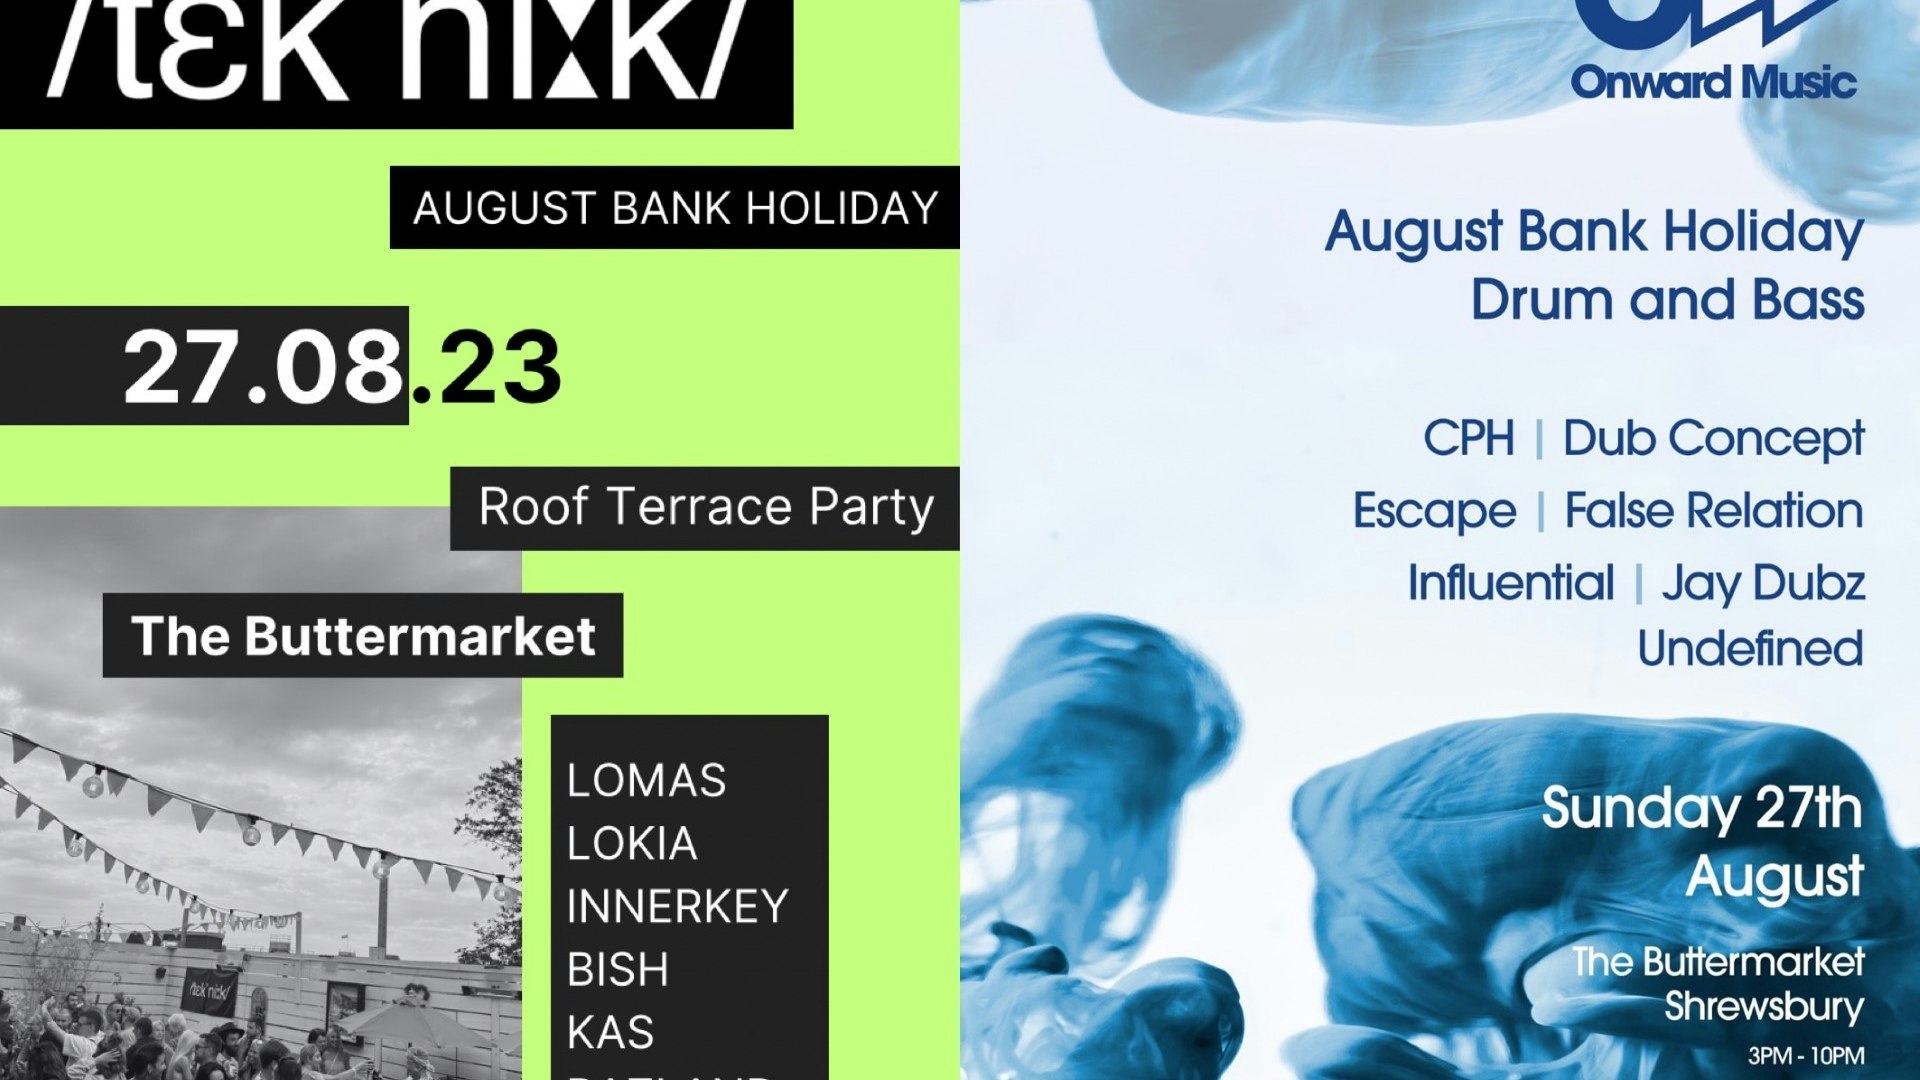 /tek’ni:k/ Onward DNB / 27th August / Bank Holiday Sunday / Roof Terrace Day Party/ 3PM